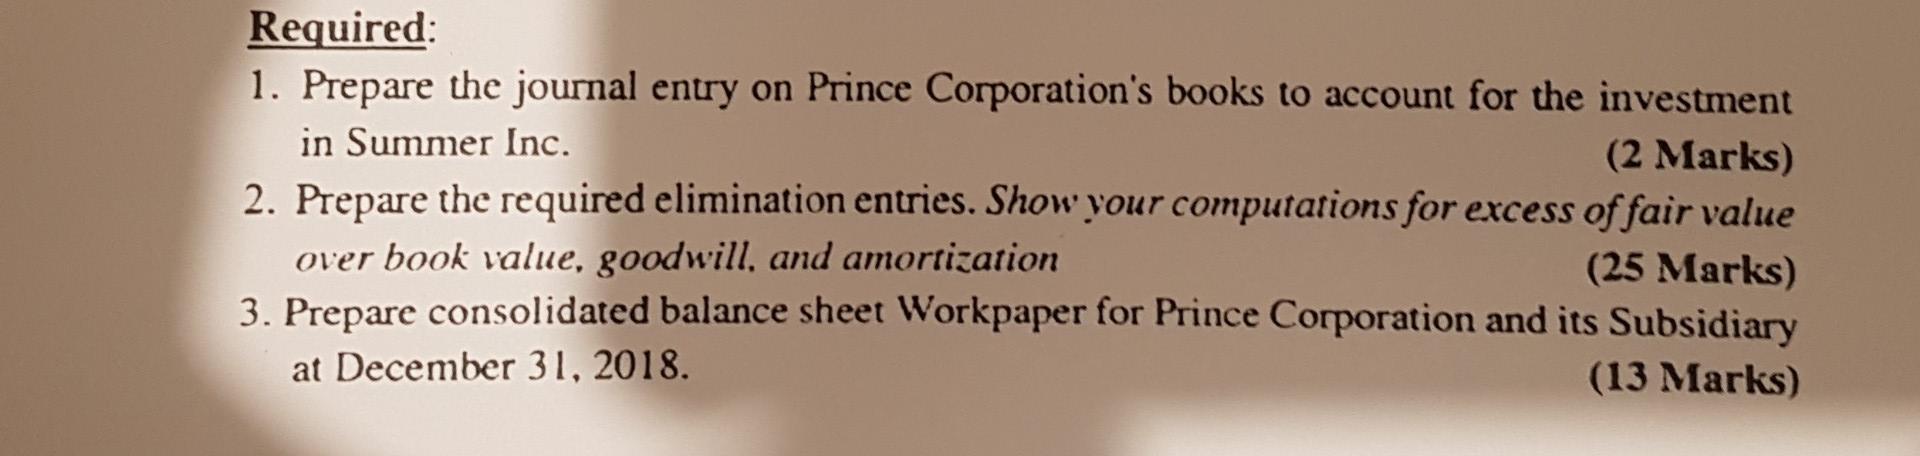 Required:1. Prepare the journal entry on Prince Corporations books to account for the investmentin Summer Inc.(2 Marks)2